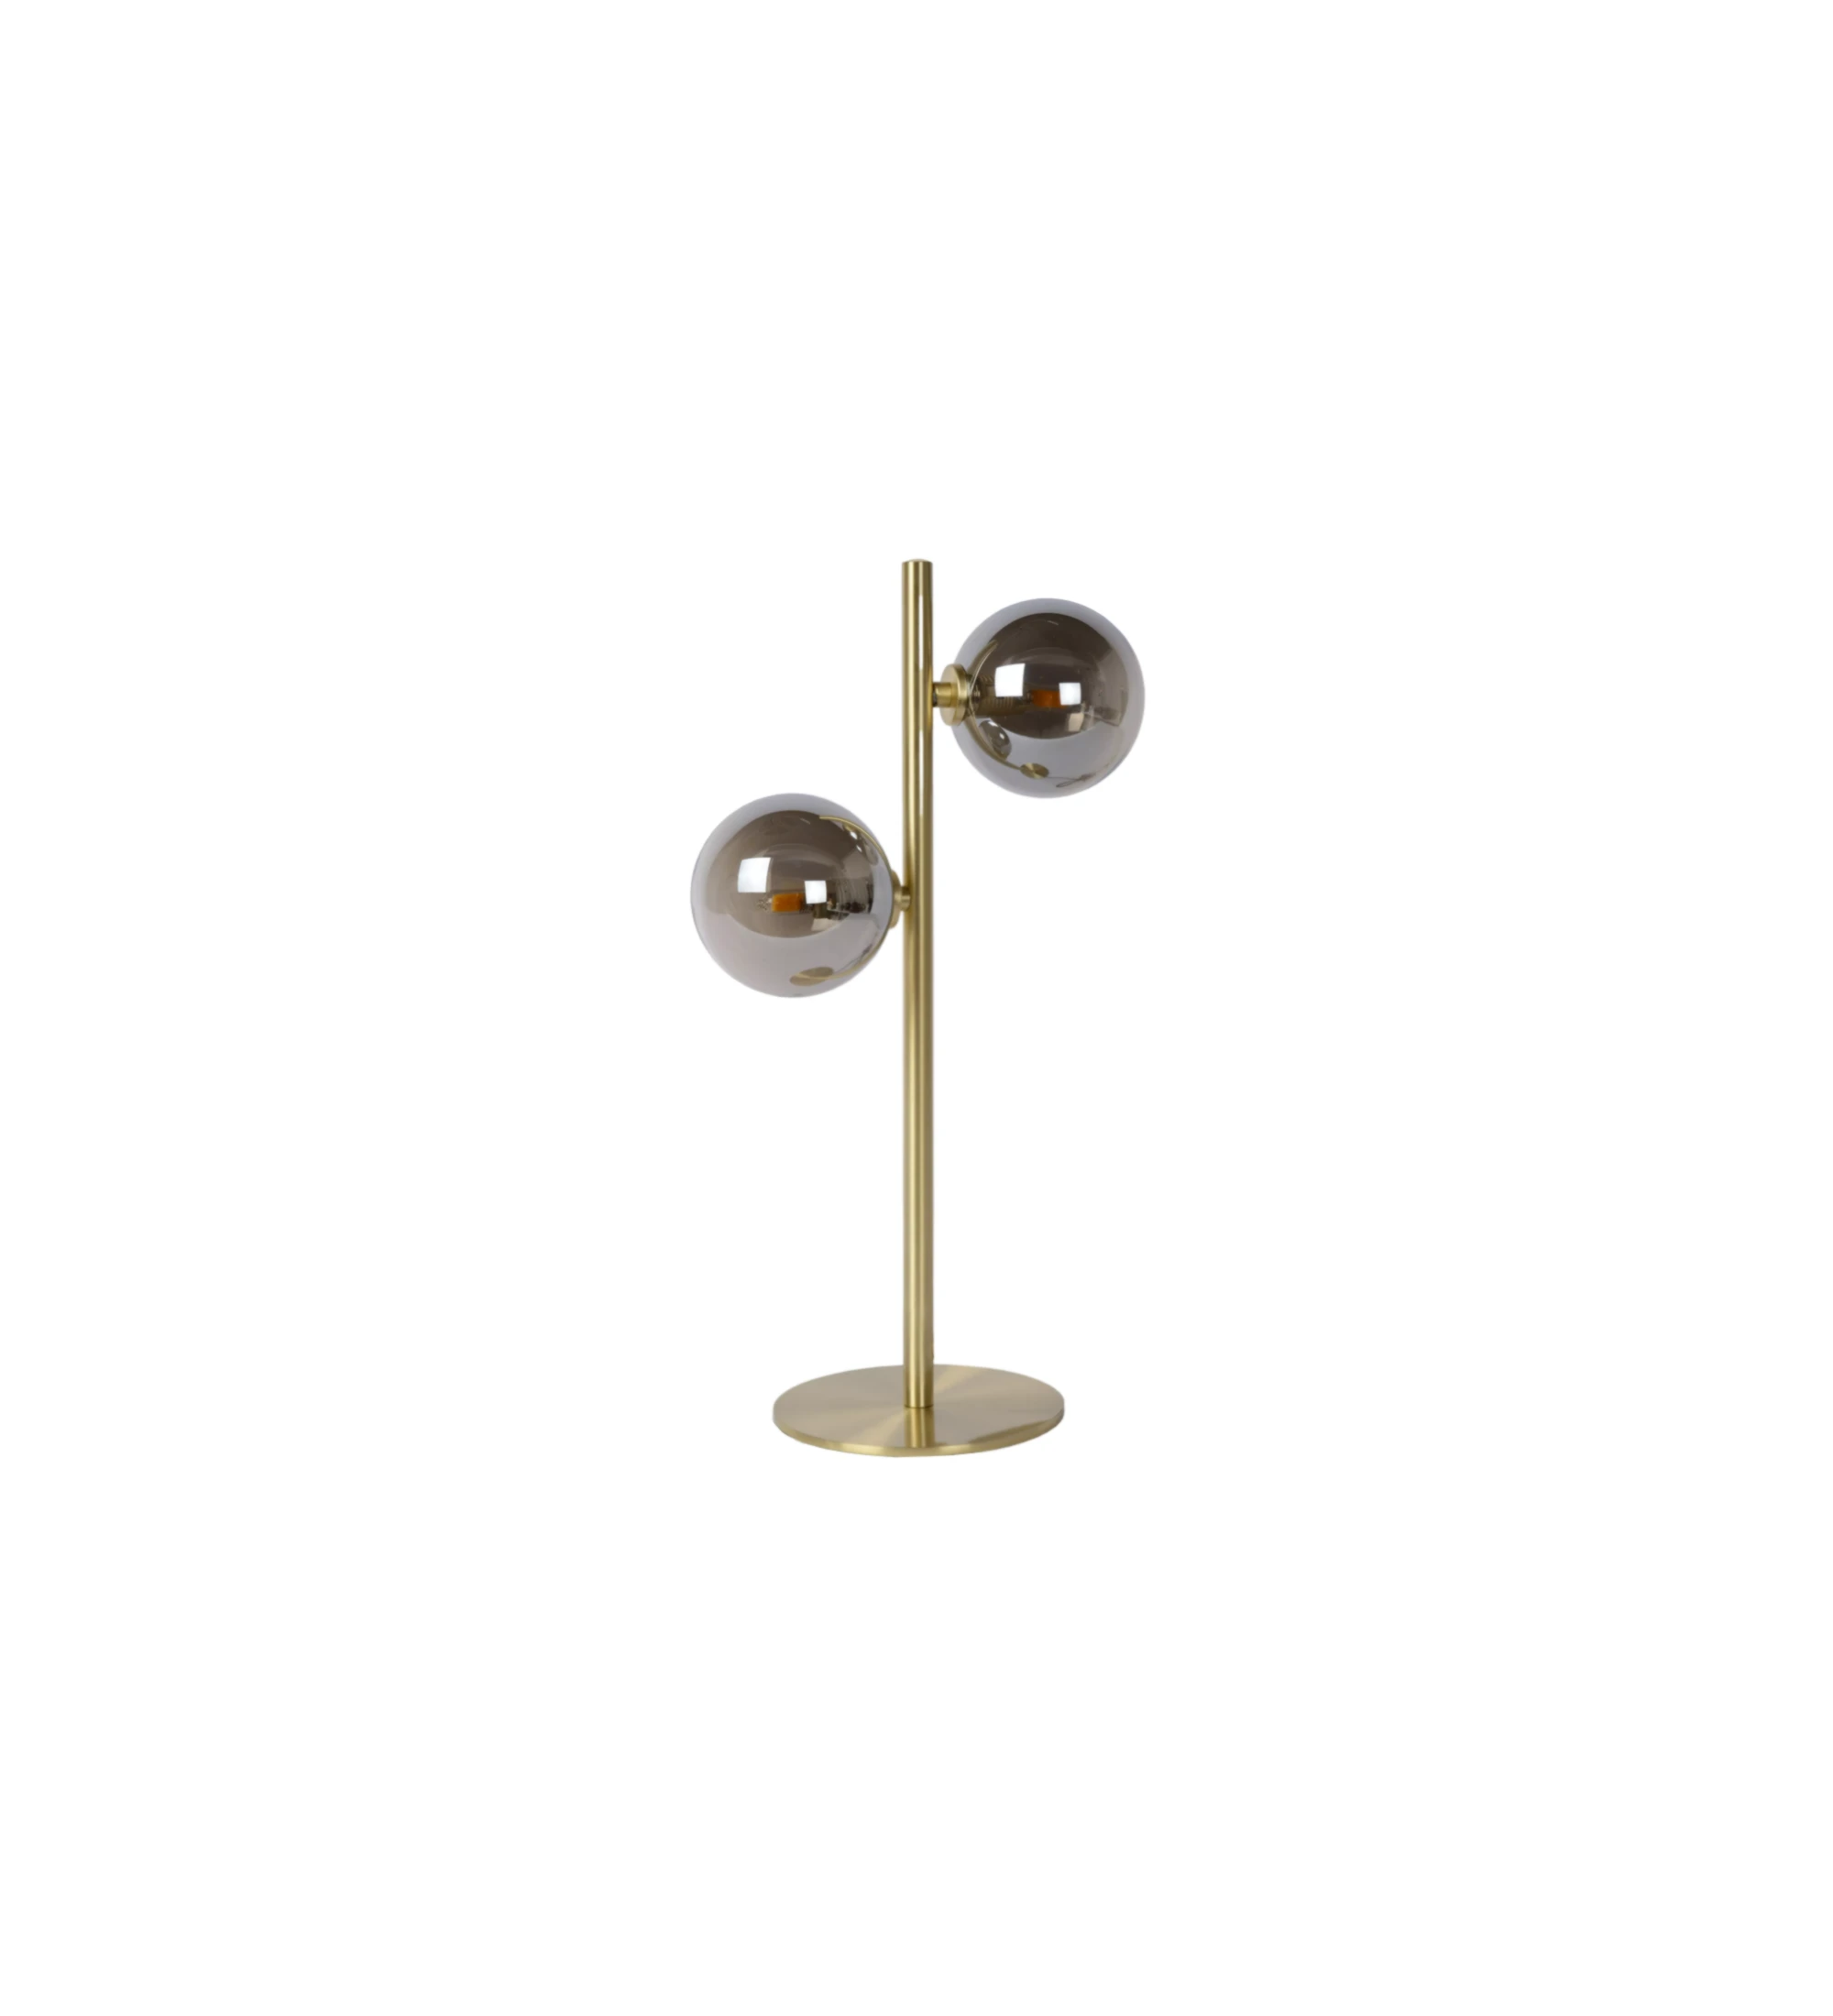  Table lamp in matte gold steel and smoky glass diffusers.